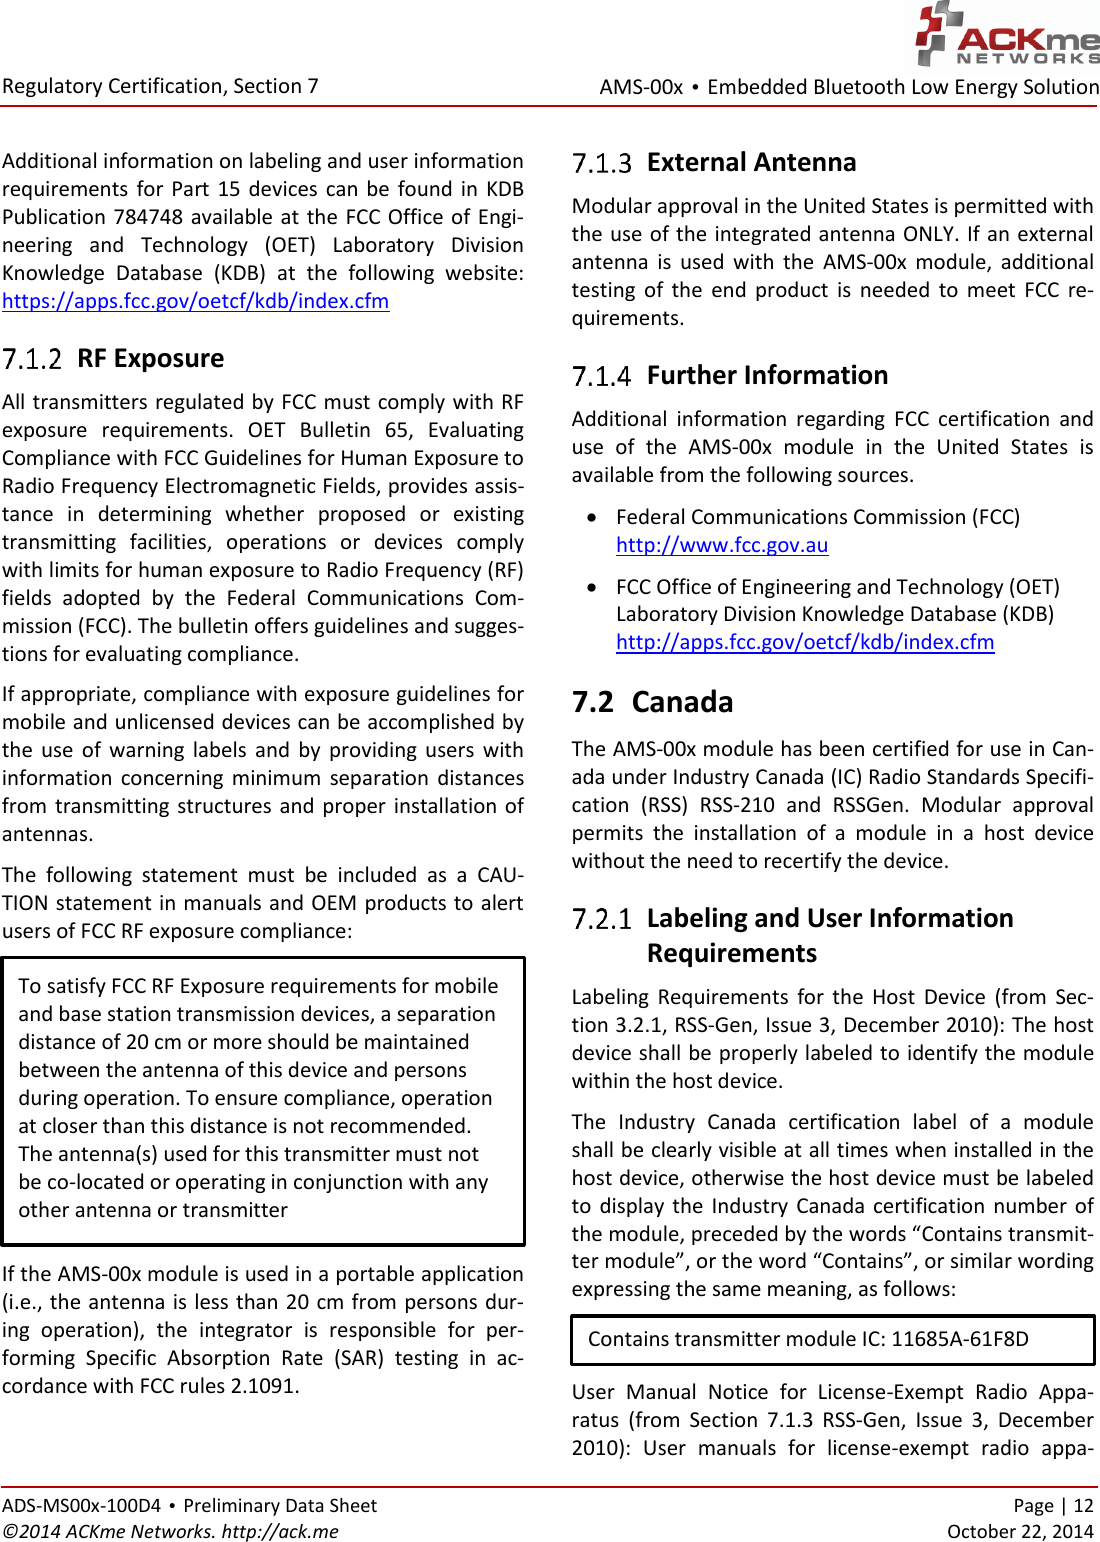 AMS-00x • Embedded Bluetooth Low Energy Solution  Regulatory Certification, Section 7 ADS-MS00x-100D4 • Preliminary Data Sheet    Page | 12 ©2014 ACKme Networks. http://ack.me    October 22, 2014  Additional information on labeling and user information requirements  for  Part  15 devices  can  be found in  KDB Publication 784748 available at the  FCC  Office  of  Engi-neering  and  Technology  (OET)  Laboratory  Division Knowledge  Database  (KDB)  at  the  following  website: https://apps.fcc.gov/oetcf/kdb/index.cfm  RF Exposure All transmitters regulated by FCC must comply with RF exposure  requirements.  OET  Bulletin  65,  Evaluating Compliance with FCC Guidelines for Human Exposure to Radio Frequency Electromagnetic Fields, provides assis-tance  in  determining  whether  proposed  or  existing transmitting  facilities,  operations  or  devices  comply with limits for human exposure to Radio Frequency (RF) fields  adopted  by  the  Federal  Communications  Com-mission (FCC). The bulletin offers guidelines and sugges-tions for evaluating compliance. If appropriate, compliance with exposure guidelines for mobile and unlicensed devices can be accomplished by the  use  of  warning  labels  and  by  providing  users  with information  concerning  minimum  separation  distances from  transmitting structures and proper installation of antennas. The  following  statement  must  be  included  as  a  CAU-TION statement in manuals and OEM products to alert users of FCC RF exposure compliance:  If the AMS-00x module is used in a portable application (i.e., the antenna is less than 20 cm from persons dur-ing  operation),  the  integrator  is  responsible  for  per-forming  Specific  Absorption  Rate  (SAR)  testing  in  ac-cordance with FCC rules 2.1091.  External Antenna Modular approval in the United States is permitted with the use of the integrated antenna ONLY. If an external antenna  is  used  with  the  AMS-00x  module,  additional testing  of  the  end  product  is  needed  to  meet  FCC  re-quirements.  Further Information Additional  information  regarding  FCC  certification  and use  of  the  AMS-00x  module  in  the  United  States  is available from the following sources.  Federal Communications Commission (FCC) http://www.fcc.gov.au  FCC Office of Engineering and Technology (OET) Laboratory Division Knowledge Database (KDB) http://apps.fcc.gov/oetcf/kdb/index.cfm 7.2 Canada The AMS-00x module has been certified for use in Can-ada under Industry Canada (IC) Radio Standards Specifi-cation  (RSS)  RSS-210  and  RSSGen.  Modular  approval permits  the  installation  of  a  module  in  a  host  device without the need to recertify the device.  Labeling and User Information  Requirements Labeling  Requirements  for  the  Host  Device  (from  Sec-tion 3.2.1, RSS-Gen, Issue 3, December 2010): The host device shall be properly labeled to identify the module within the host device. The  Industry  Canada  certification  label  of  a  module shall be clearly visible at all times when installed in the host device, otherwise the host device must be labeled to  display the  Industry  Canada certification  number  of the module, preceded by the words “Contains transmit-ter module”, or the word “Contains”, or similar wording expressing the same meaning, as follows:  User  Manual  Notice  for  License-Exempt  Radio  Appa-ratus  (from  Section  7.1.3  RSS-Gen,  Issue  3,  December 2010):  User  manuals  for  license-exempt  radio  appa-To satisfy FCC RF Exposure requirements for mobile and base station transmission devices, a separation distance of 20 cm or more should be maintained between the antenna of this device and persons during operation. To ensure compliance, operation at closer than this distance is not recommended. The antenna(s) used for this transmitter must not be co-located or operating in conjunction with any other antenna or transmitter Contains transmitter module IC: 11685A-61F8D 